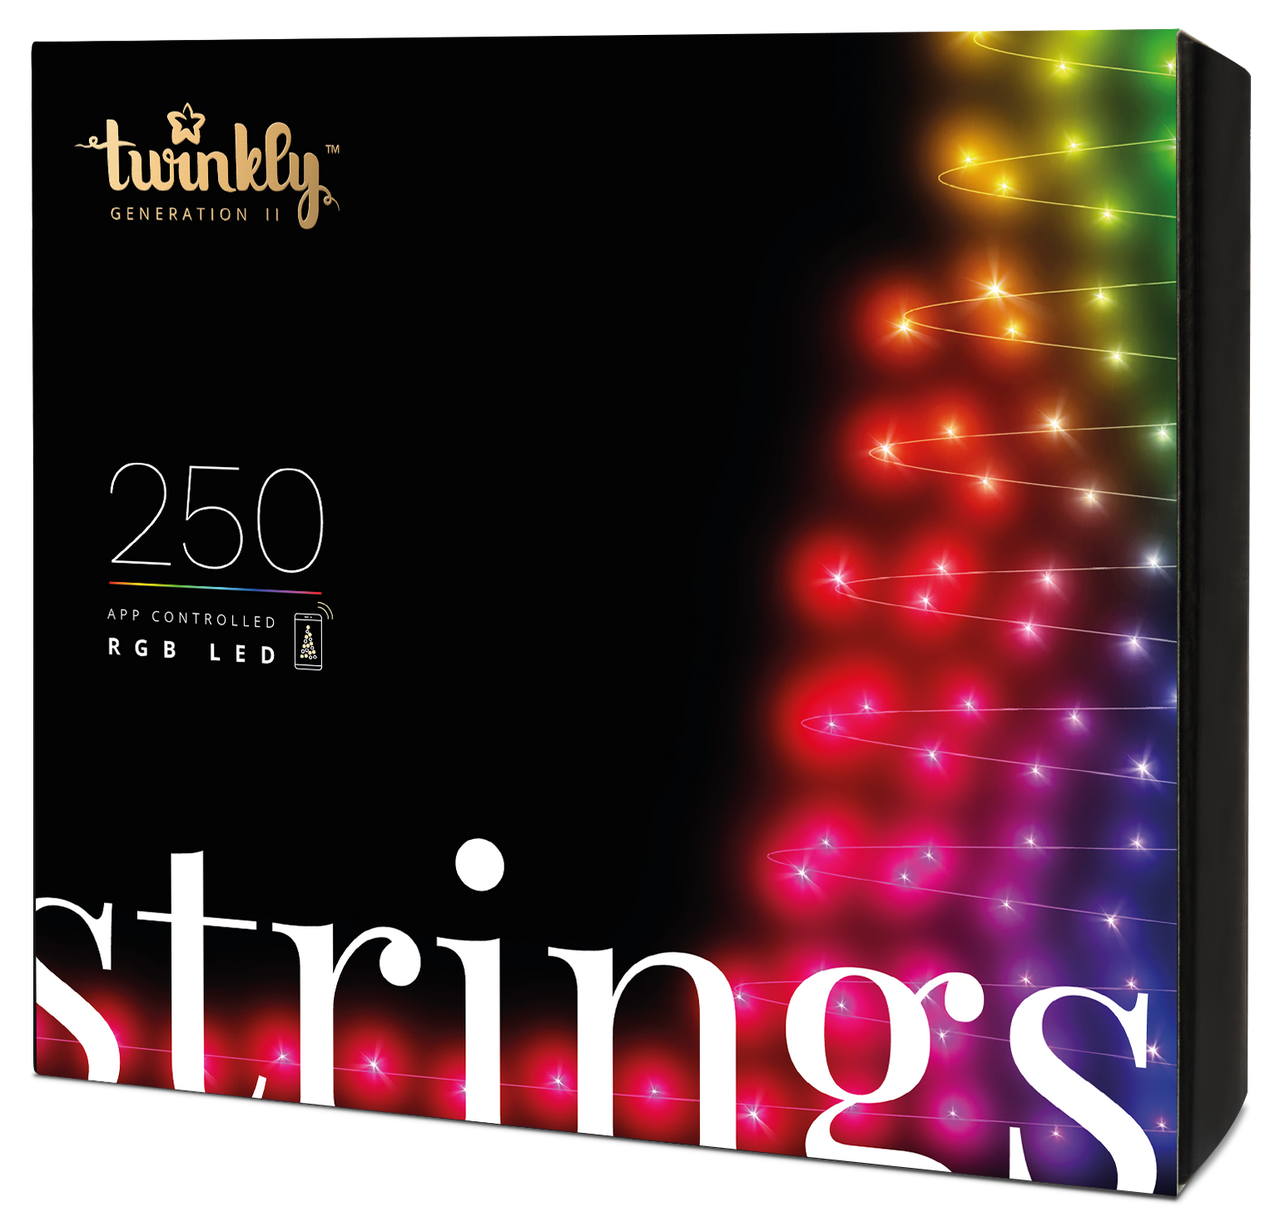 20m 250 LED Twinkly Smart App Controlled String Lights Multi Coloured